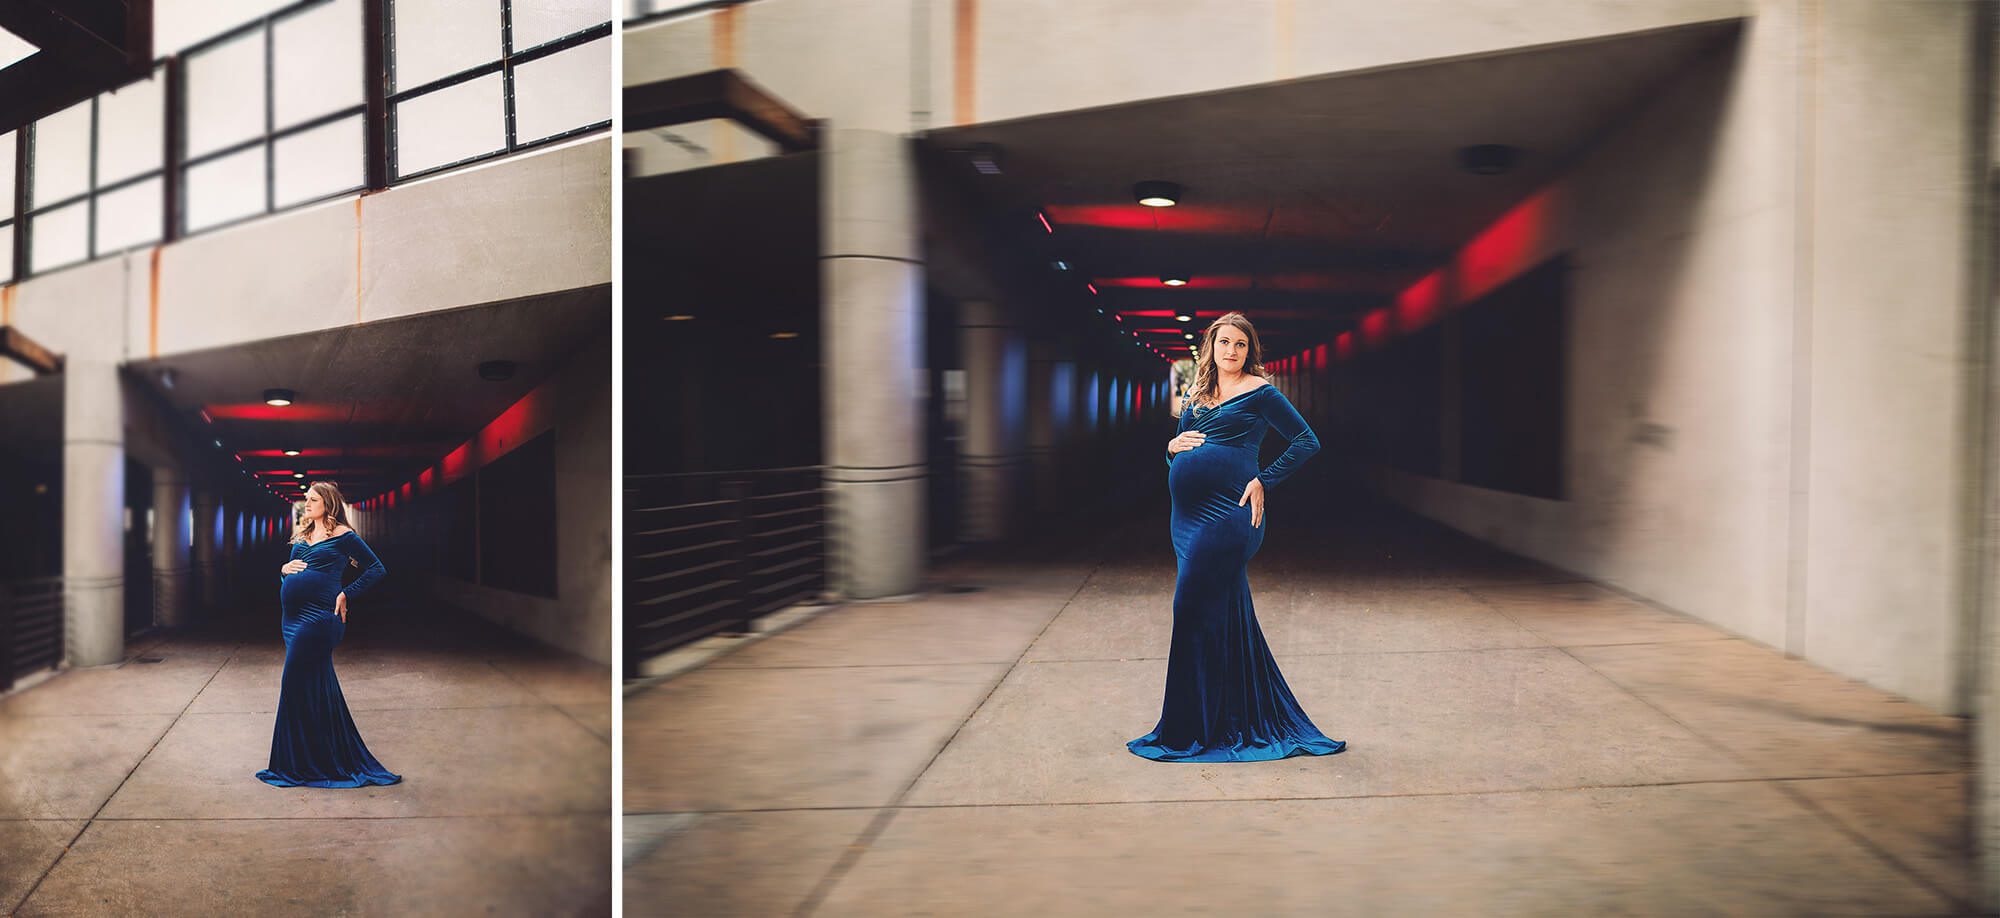 An urban maternity session featuring the colorful lights of an underpass